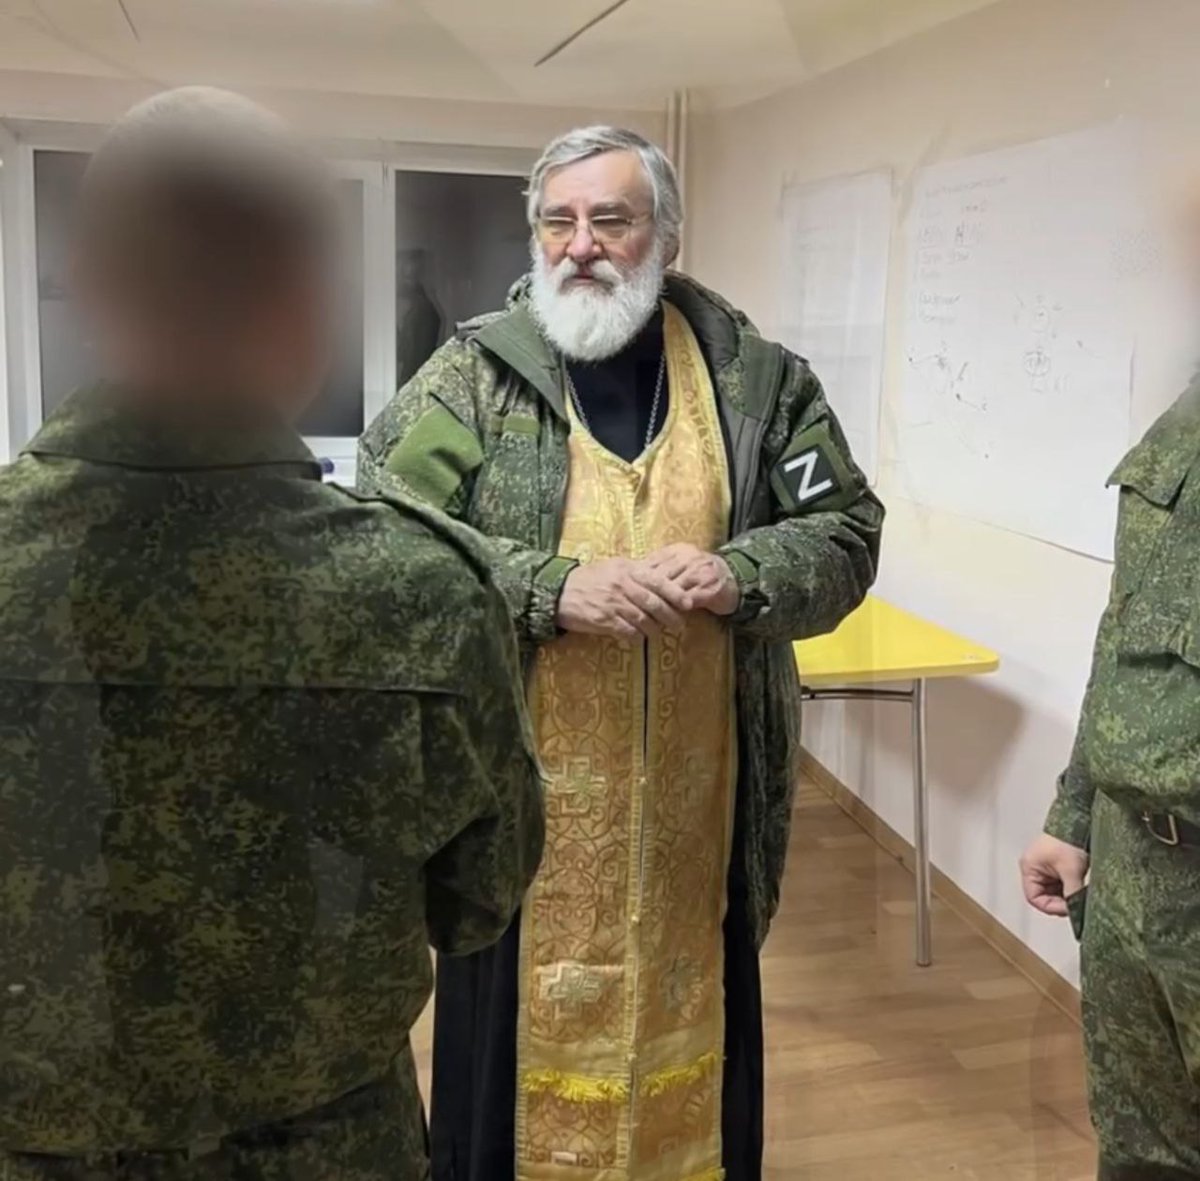 This is Metropolitan Ioann of Belgorod blessing mobilised Russian troops ahead of their departure to Ukraine I hope for their sake that they're unaware of him also blessing the Kursk submarine in 1995... t.me/sotaproject/48…